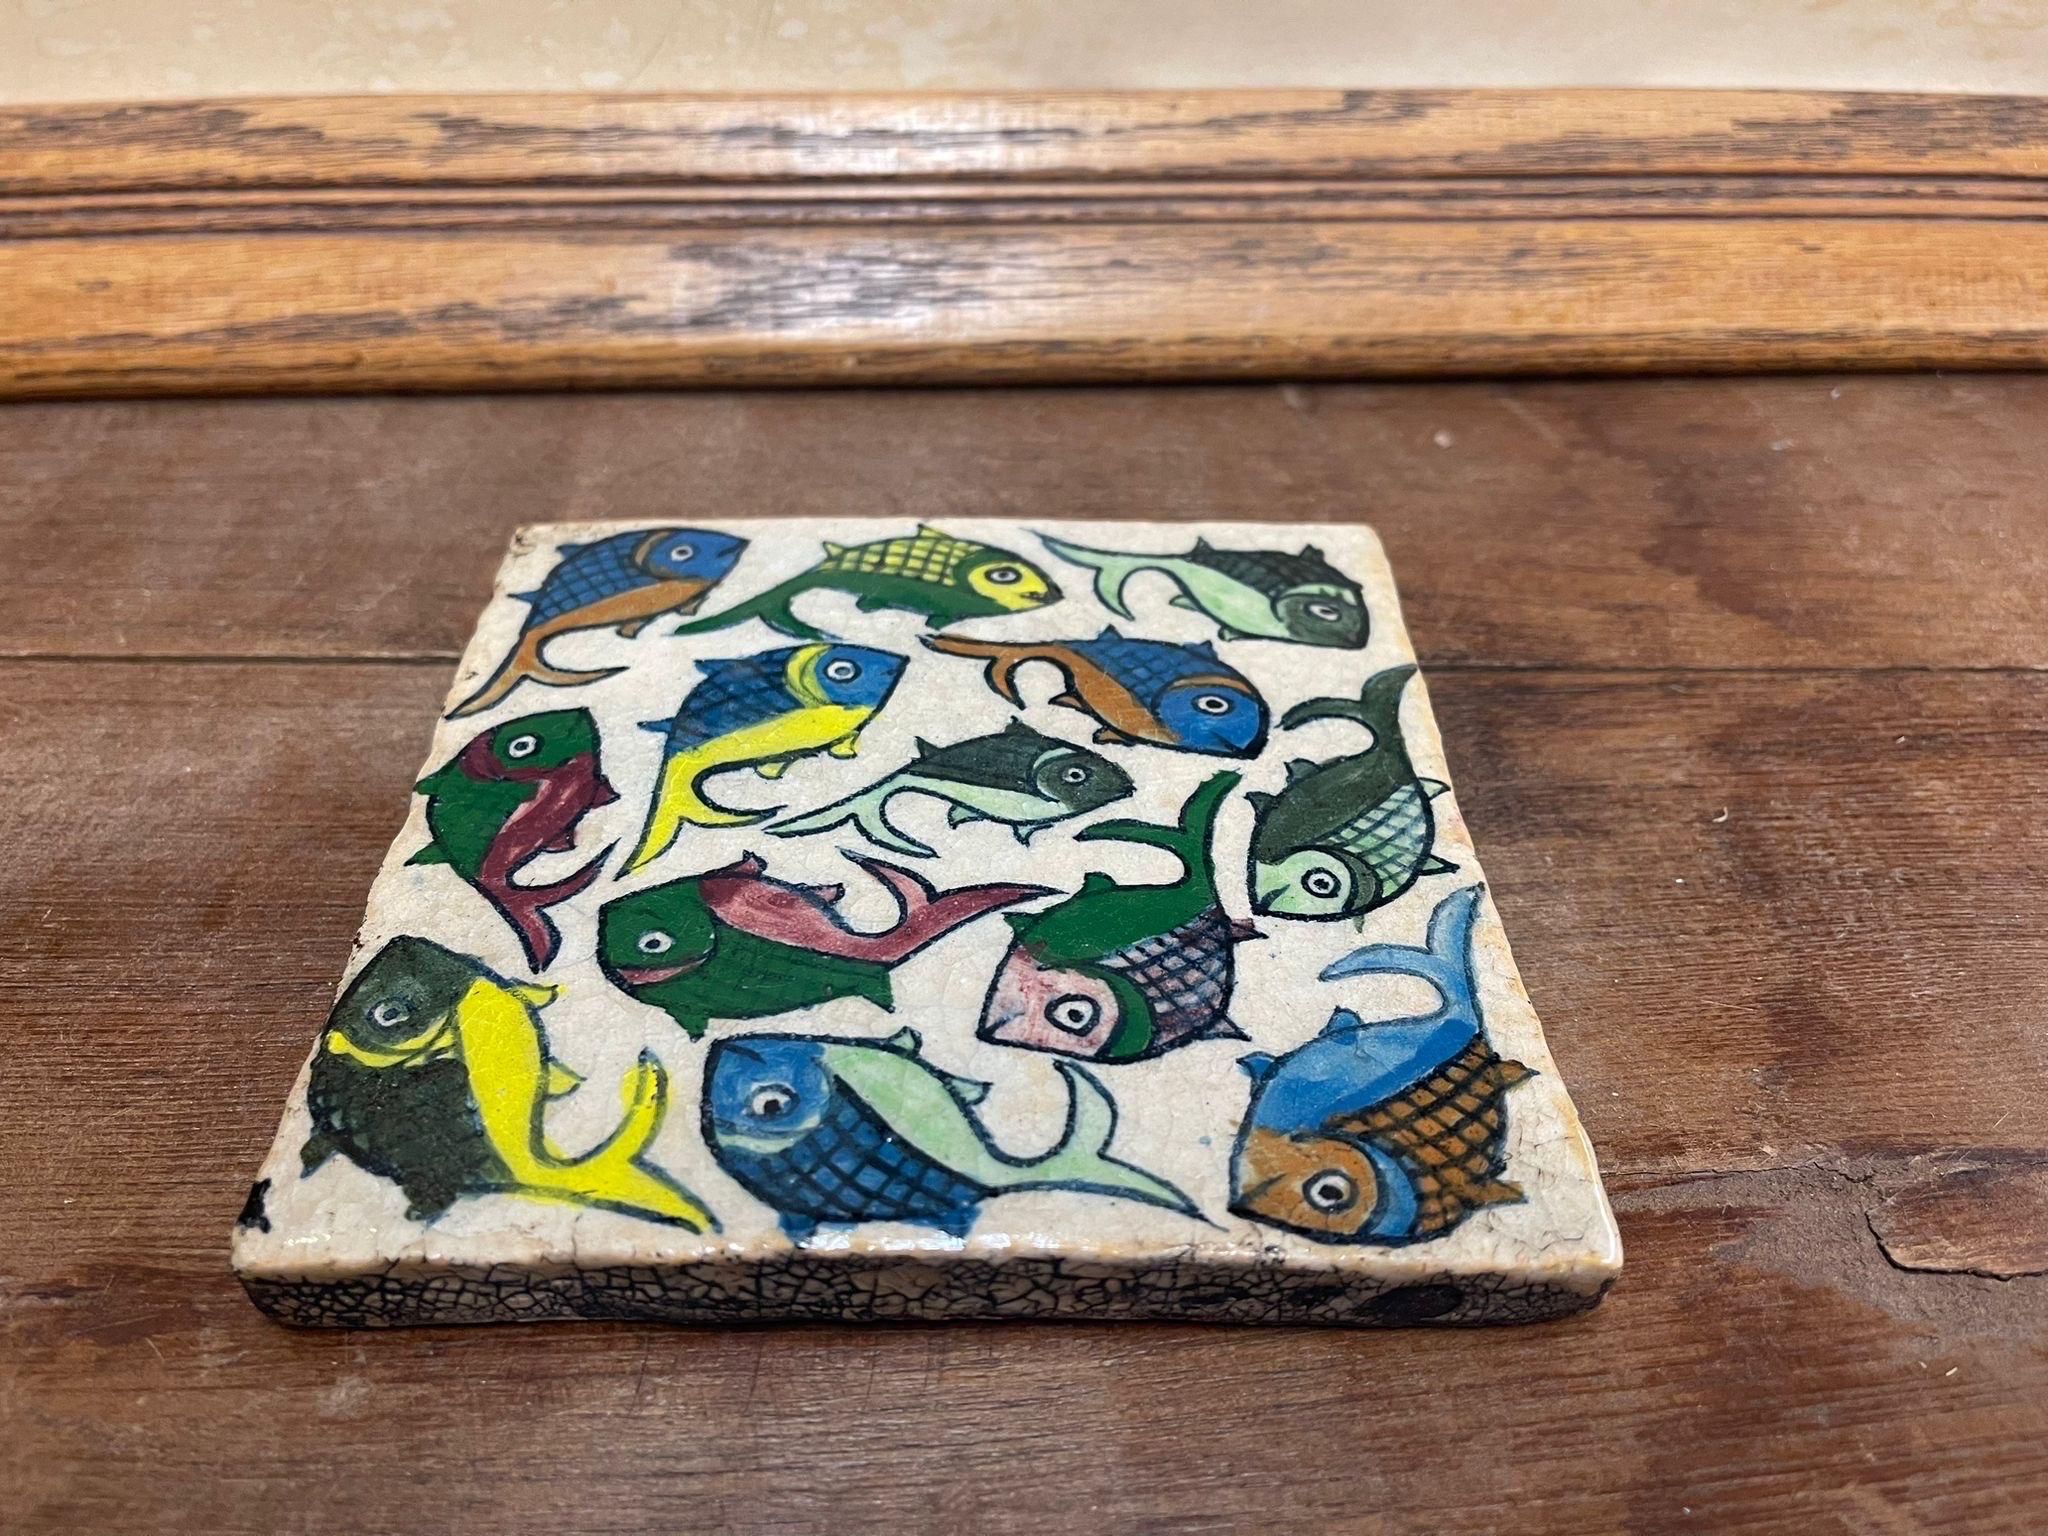 Late 20th Century Vintage Hand Painted Italian Tile With Swimming Fish Motif. For Sale